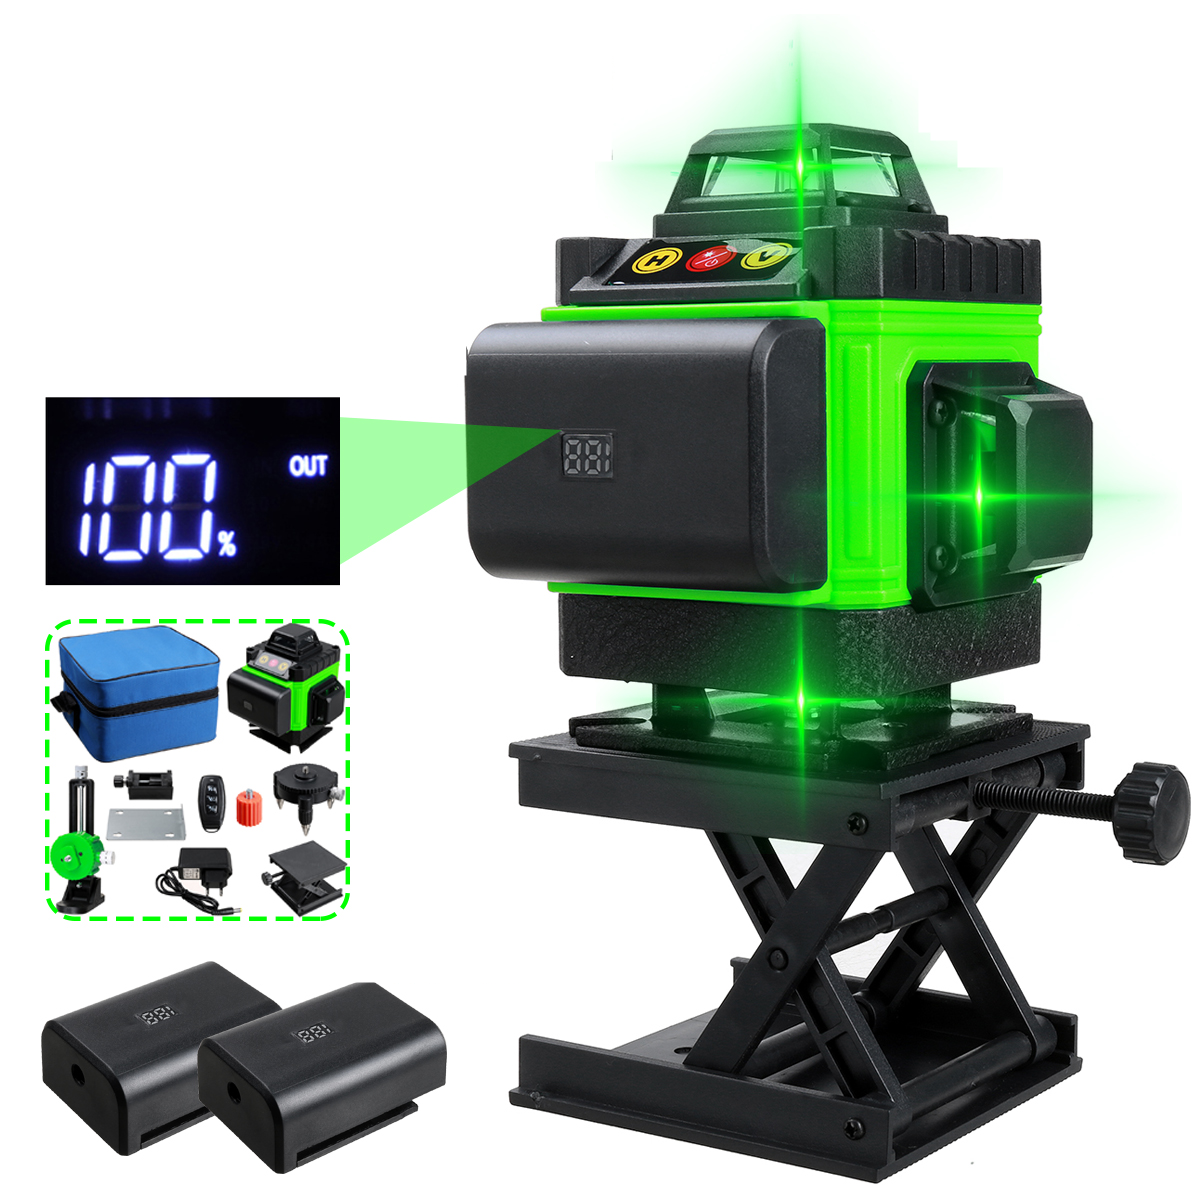 

16 Lines 4D Laser Level, Green Laser Line, Self Leveling, Horizontal Lines &360 Degree Vertical Cross with 1/2 Battery f